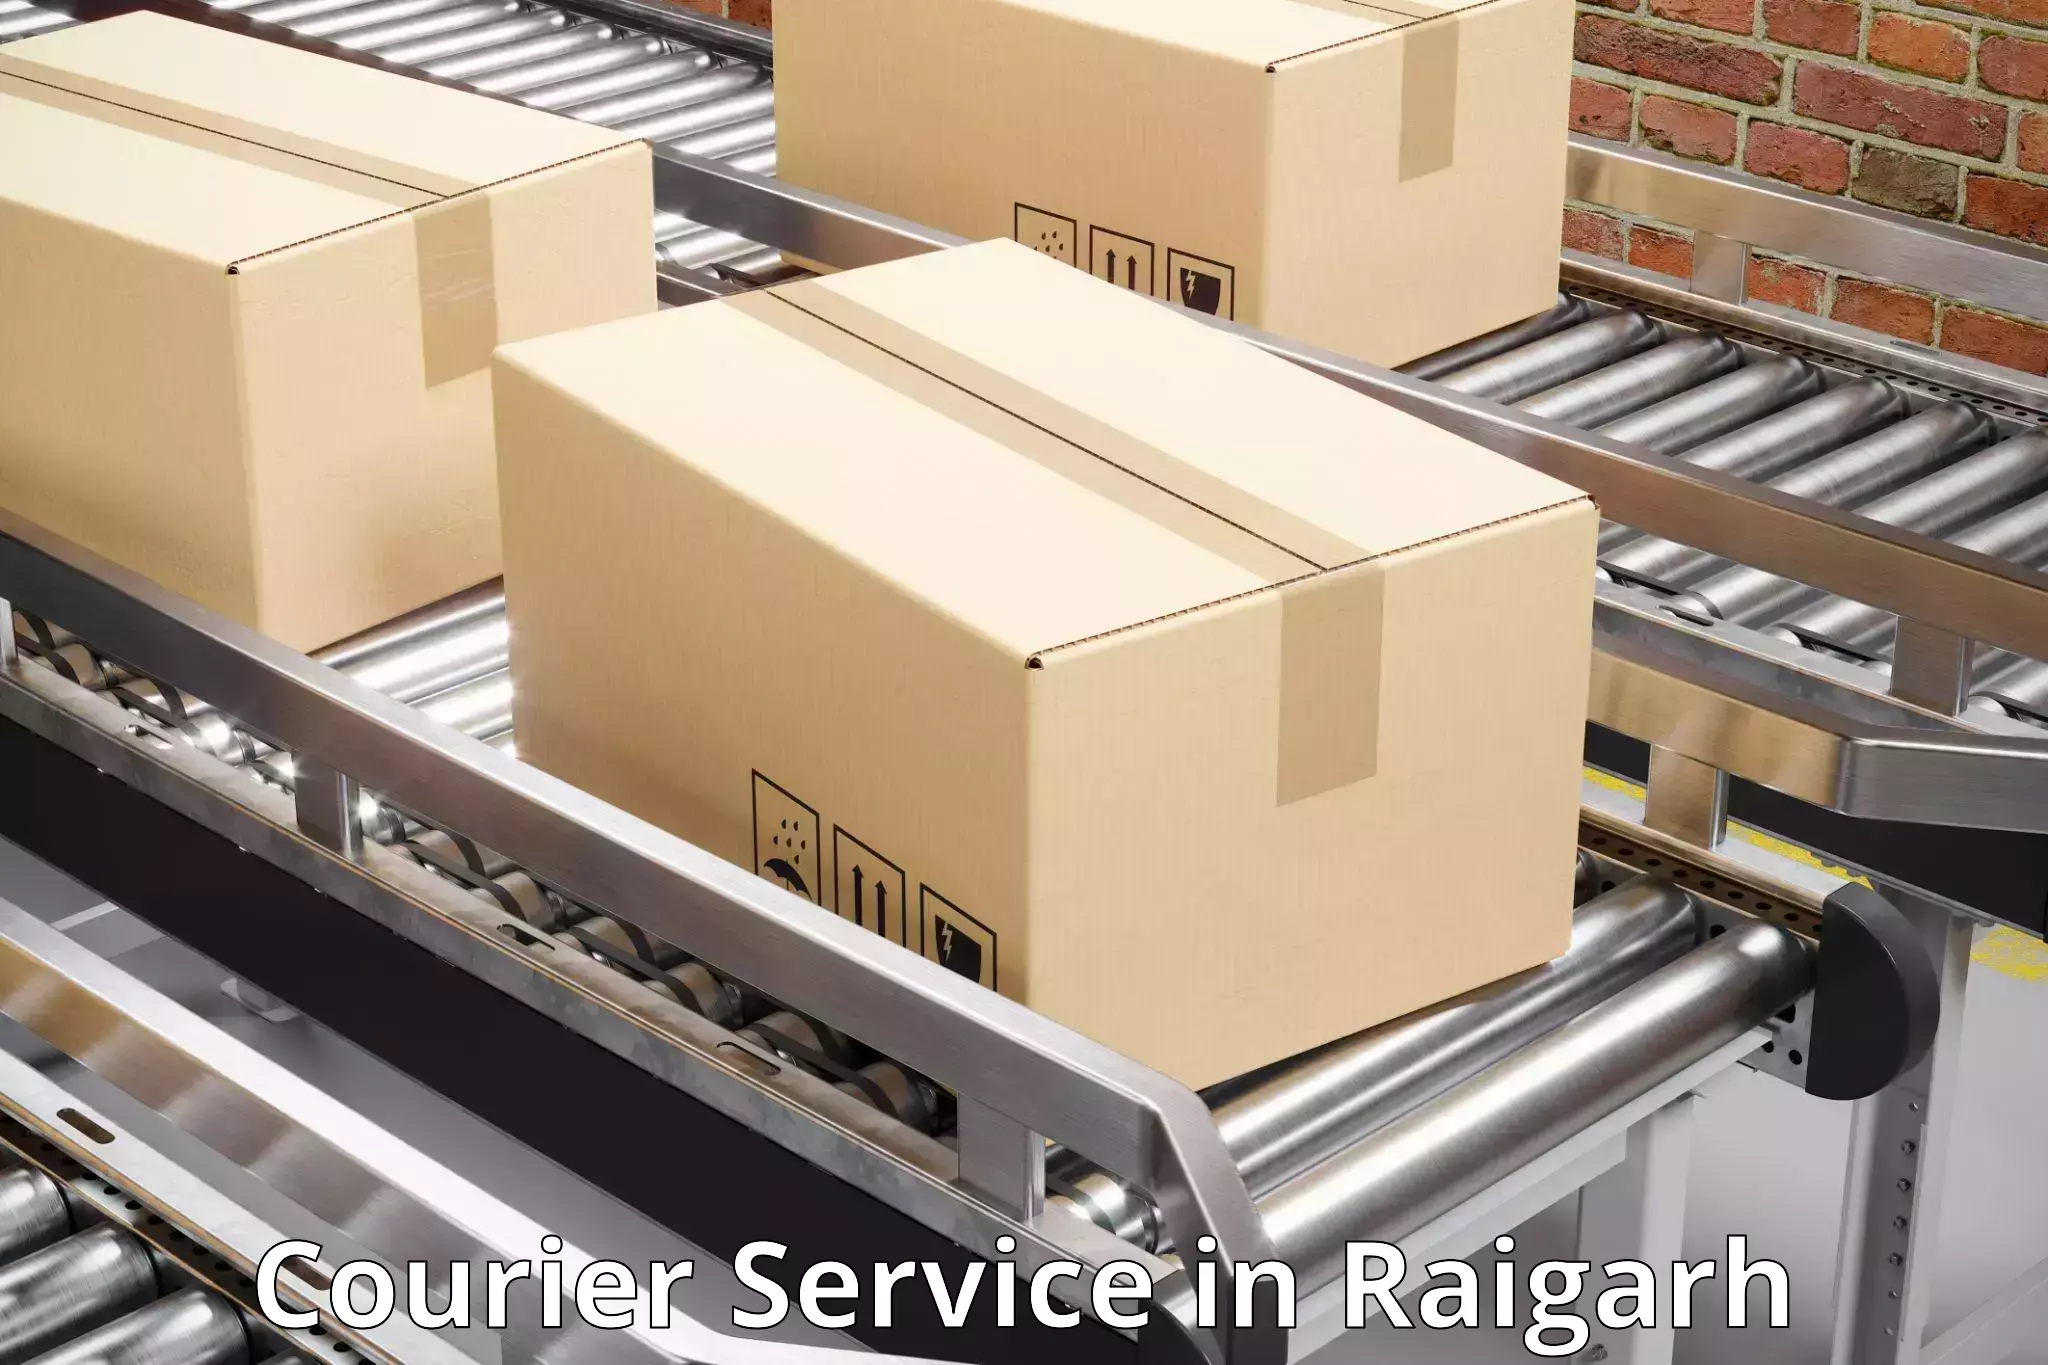 Logistics and distribution in Raigarh